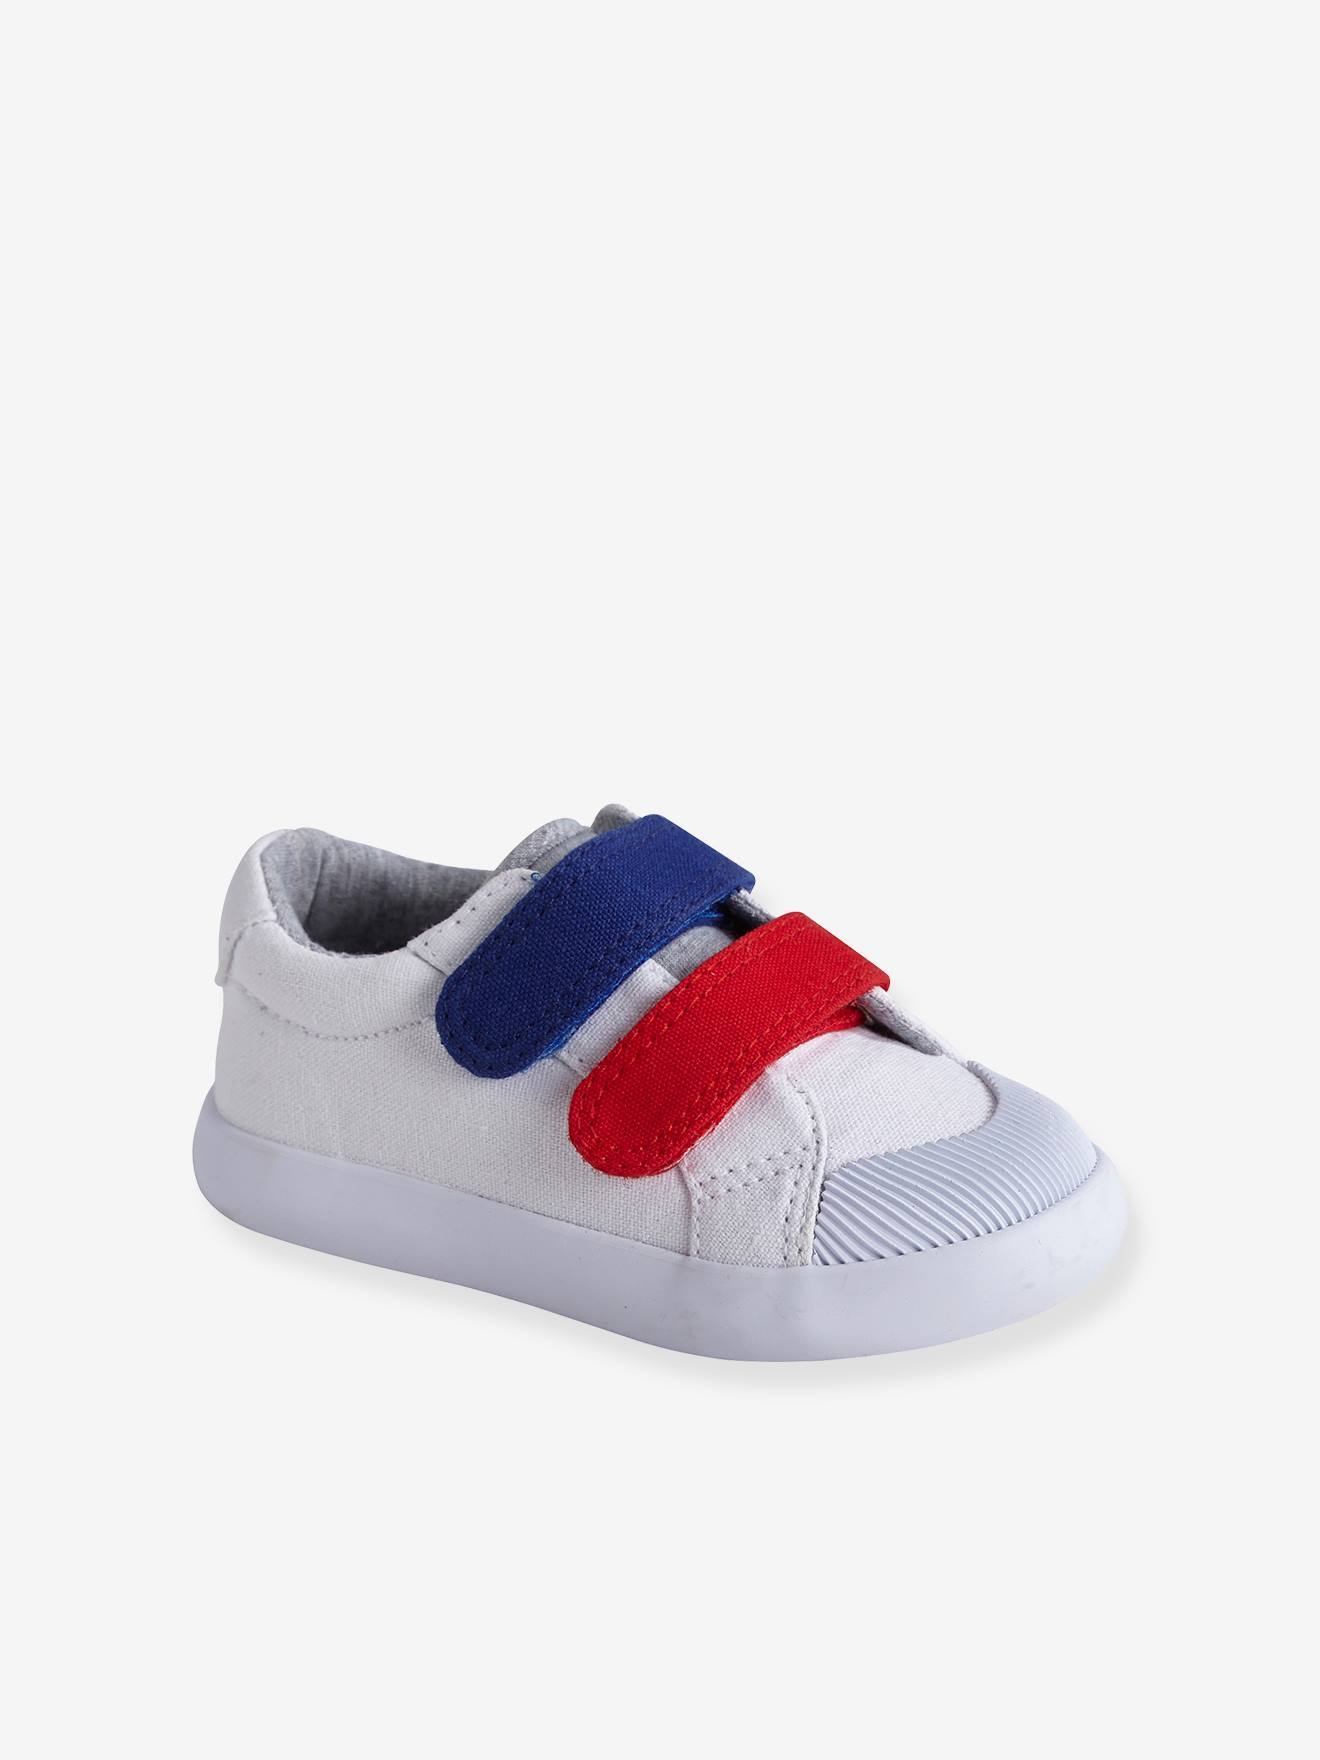 baby trainers